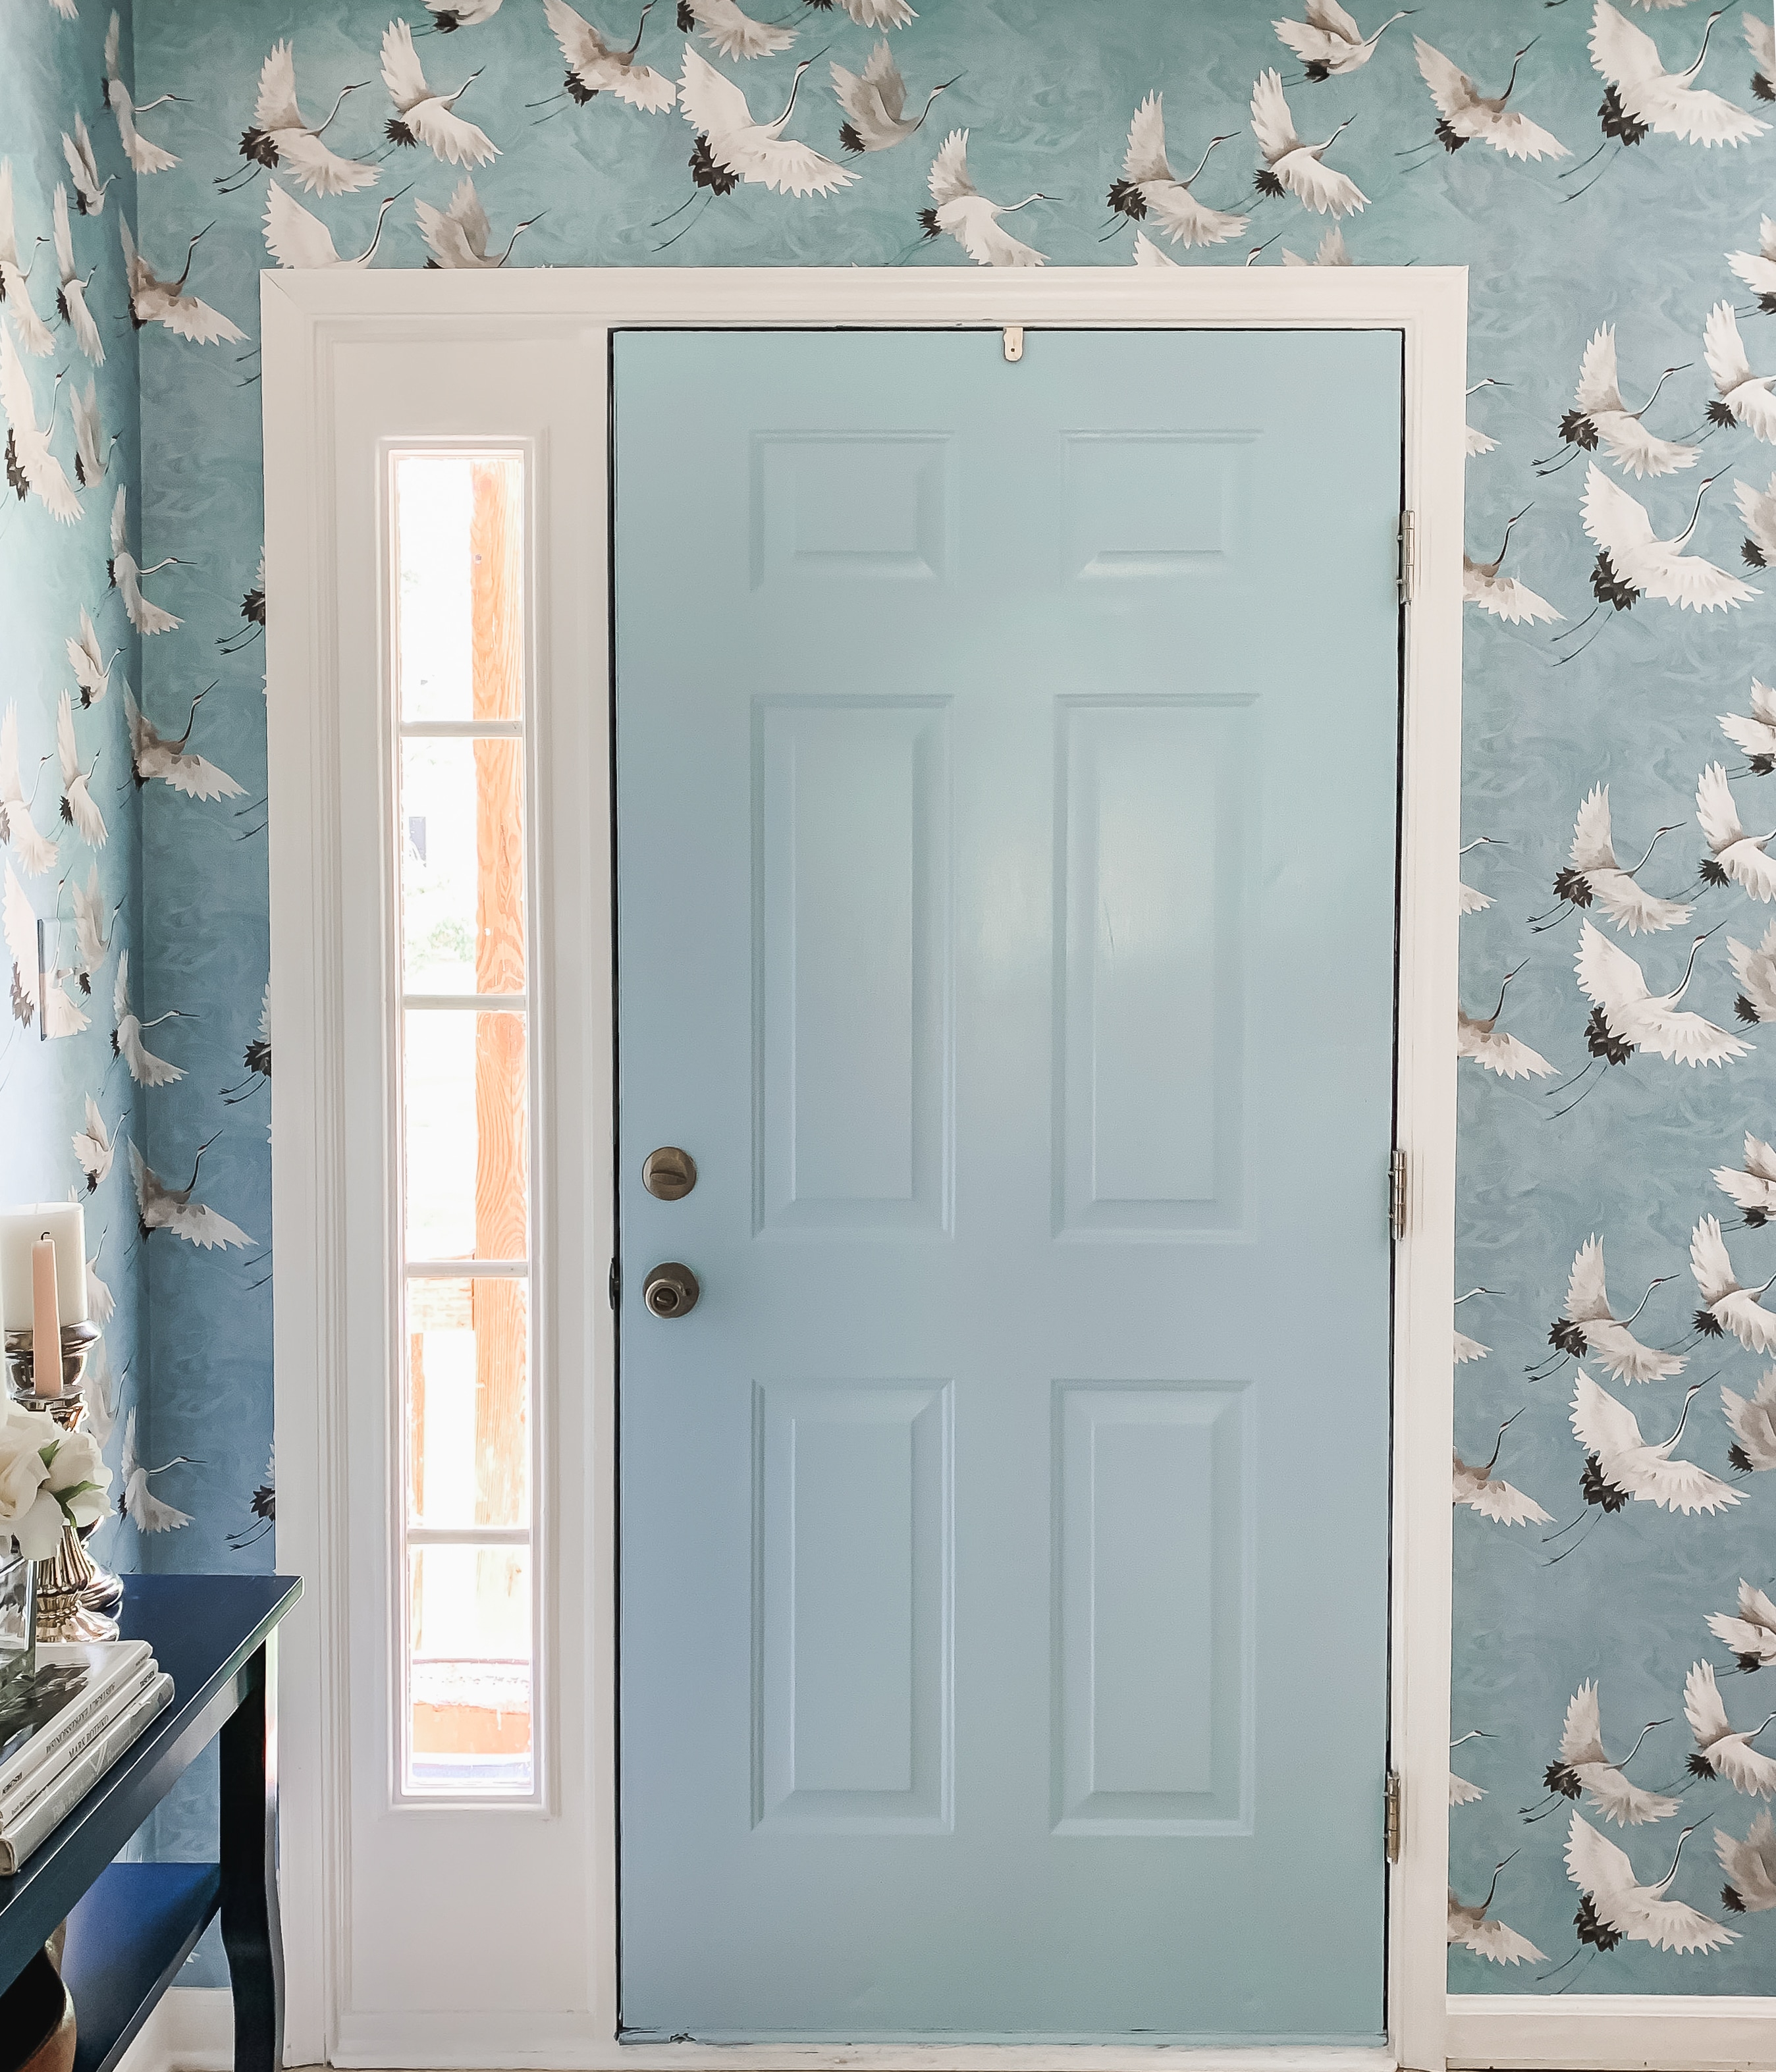 Bold, blue crane wallpapered entryway design with Sherwin Williams Stream painted door